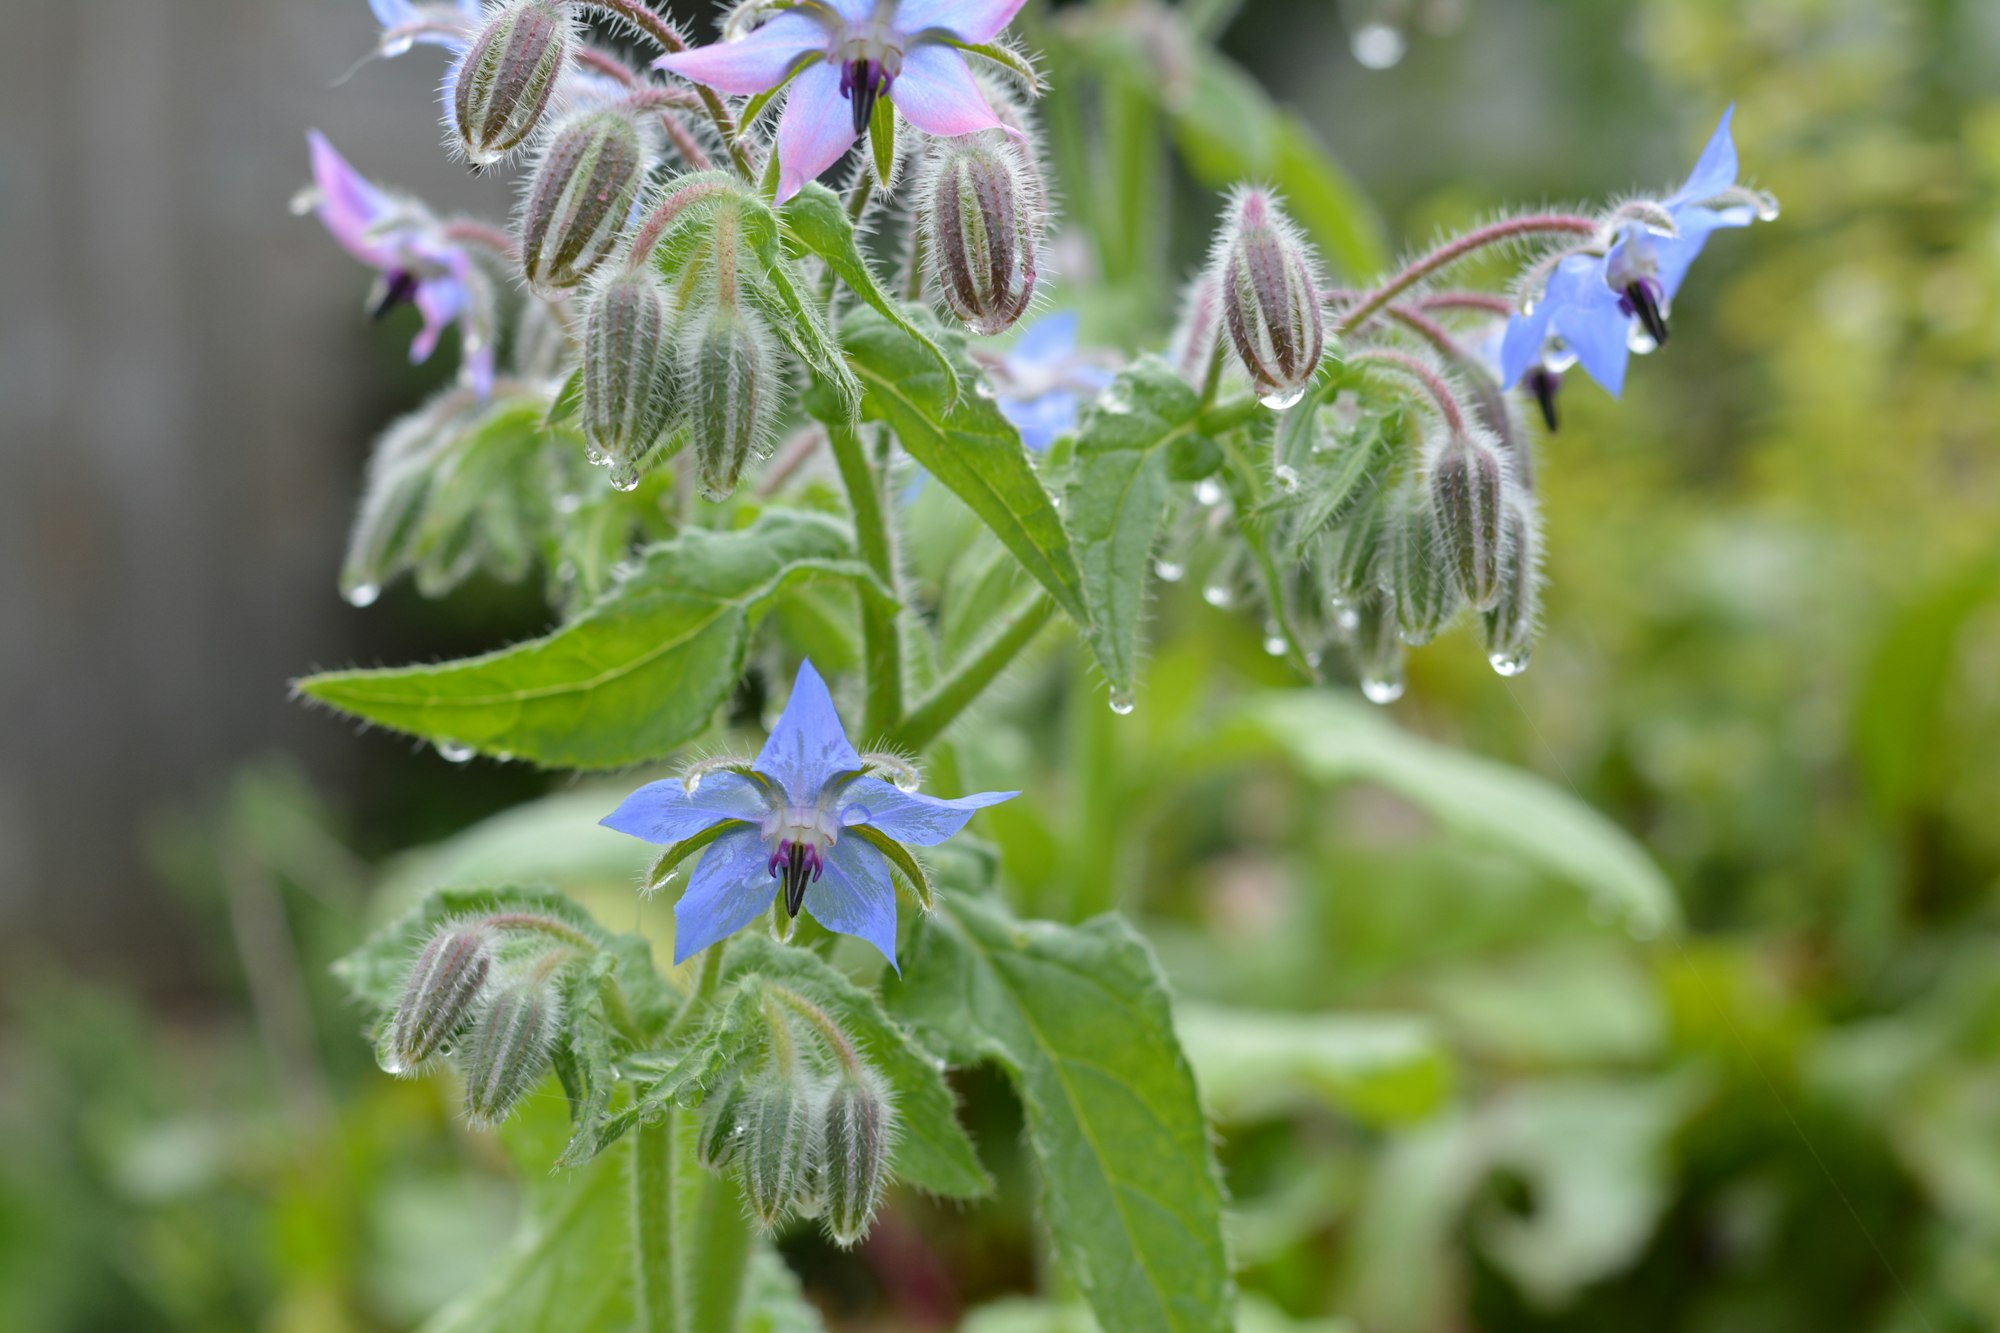 Flower called Borage, and it smells like a fresh cucumber